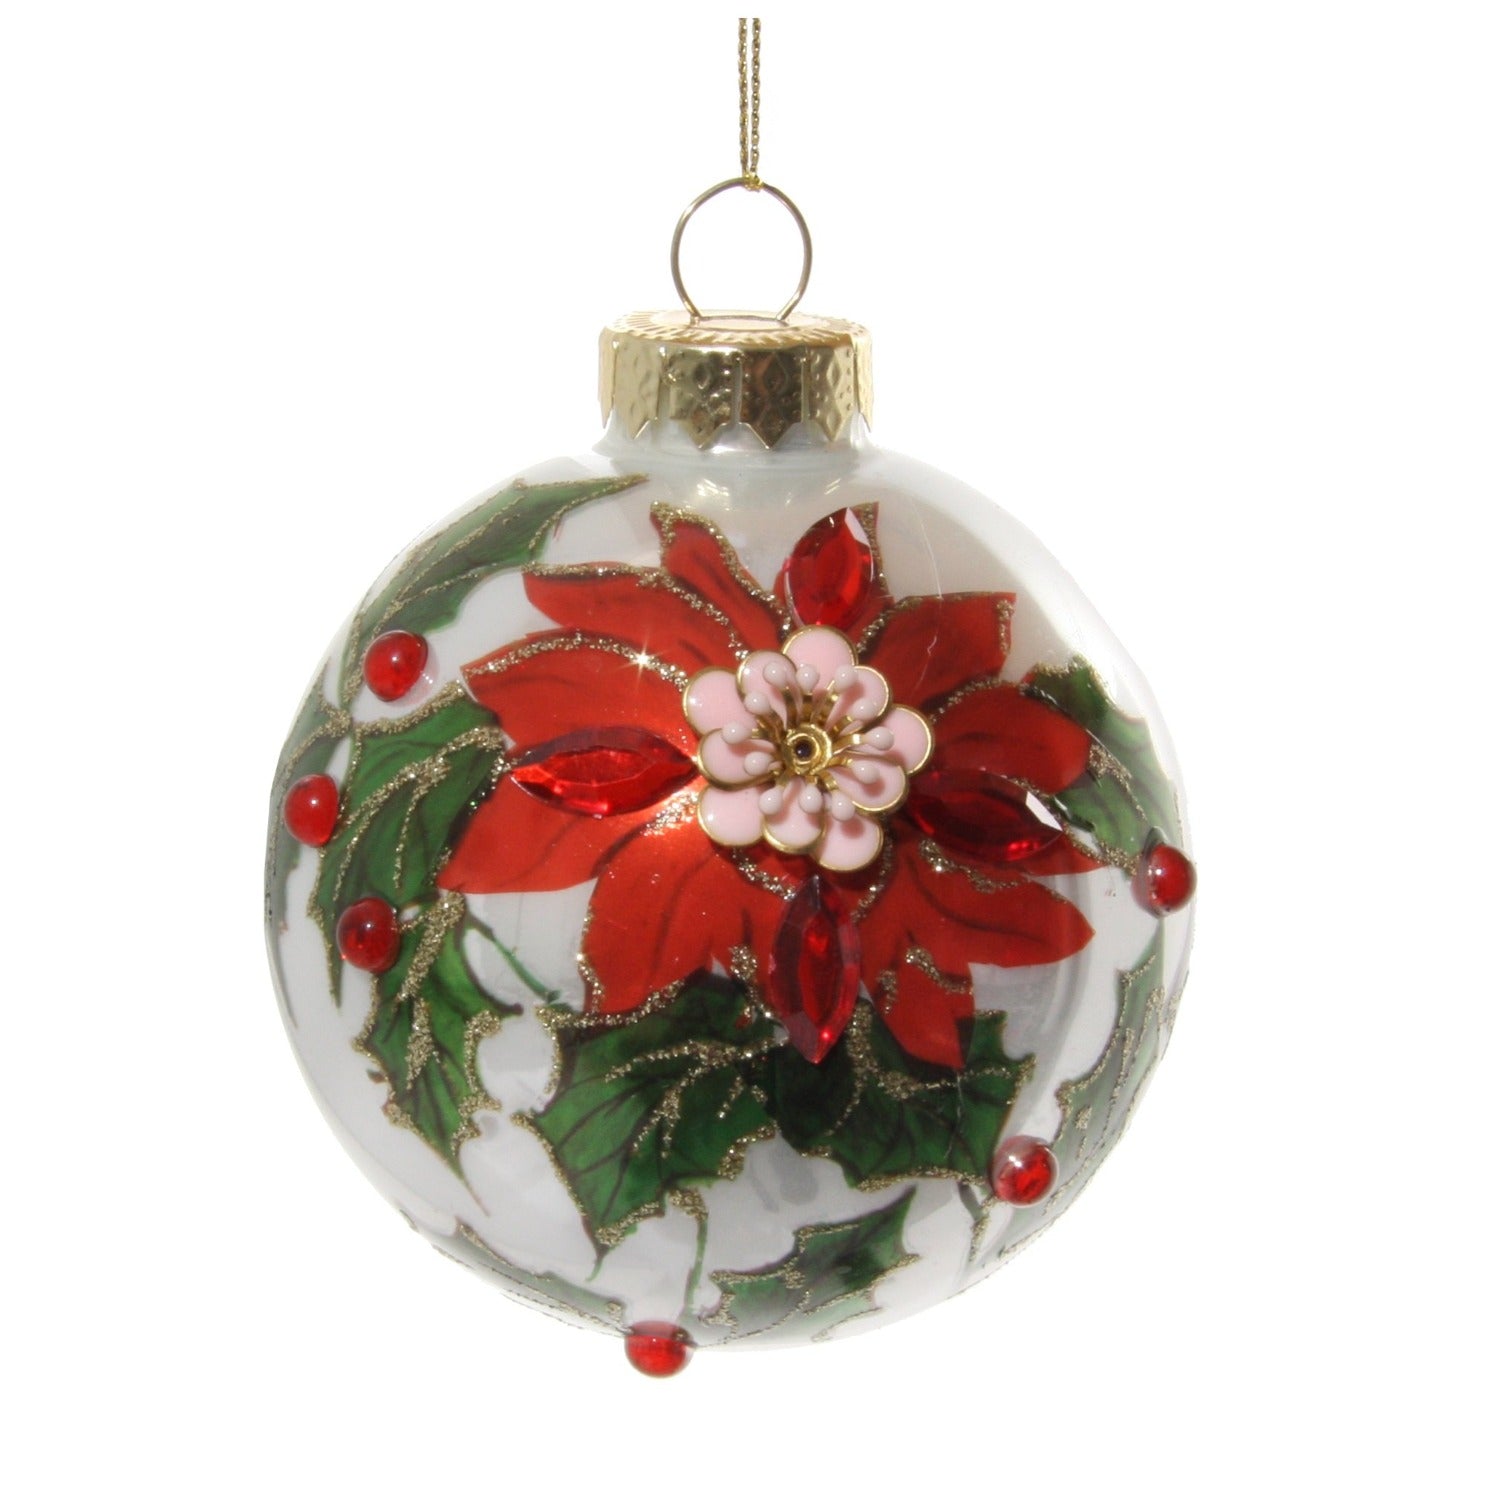 Shishi Green Poinsettia & Holly Glass Bauble Christmas Hanging Ornament